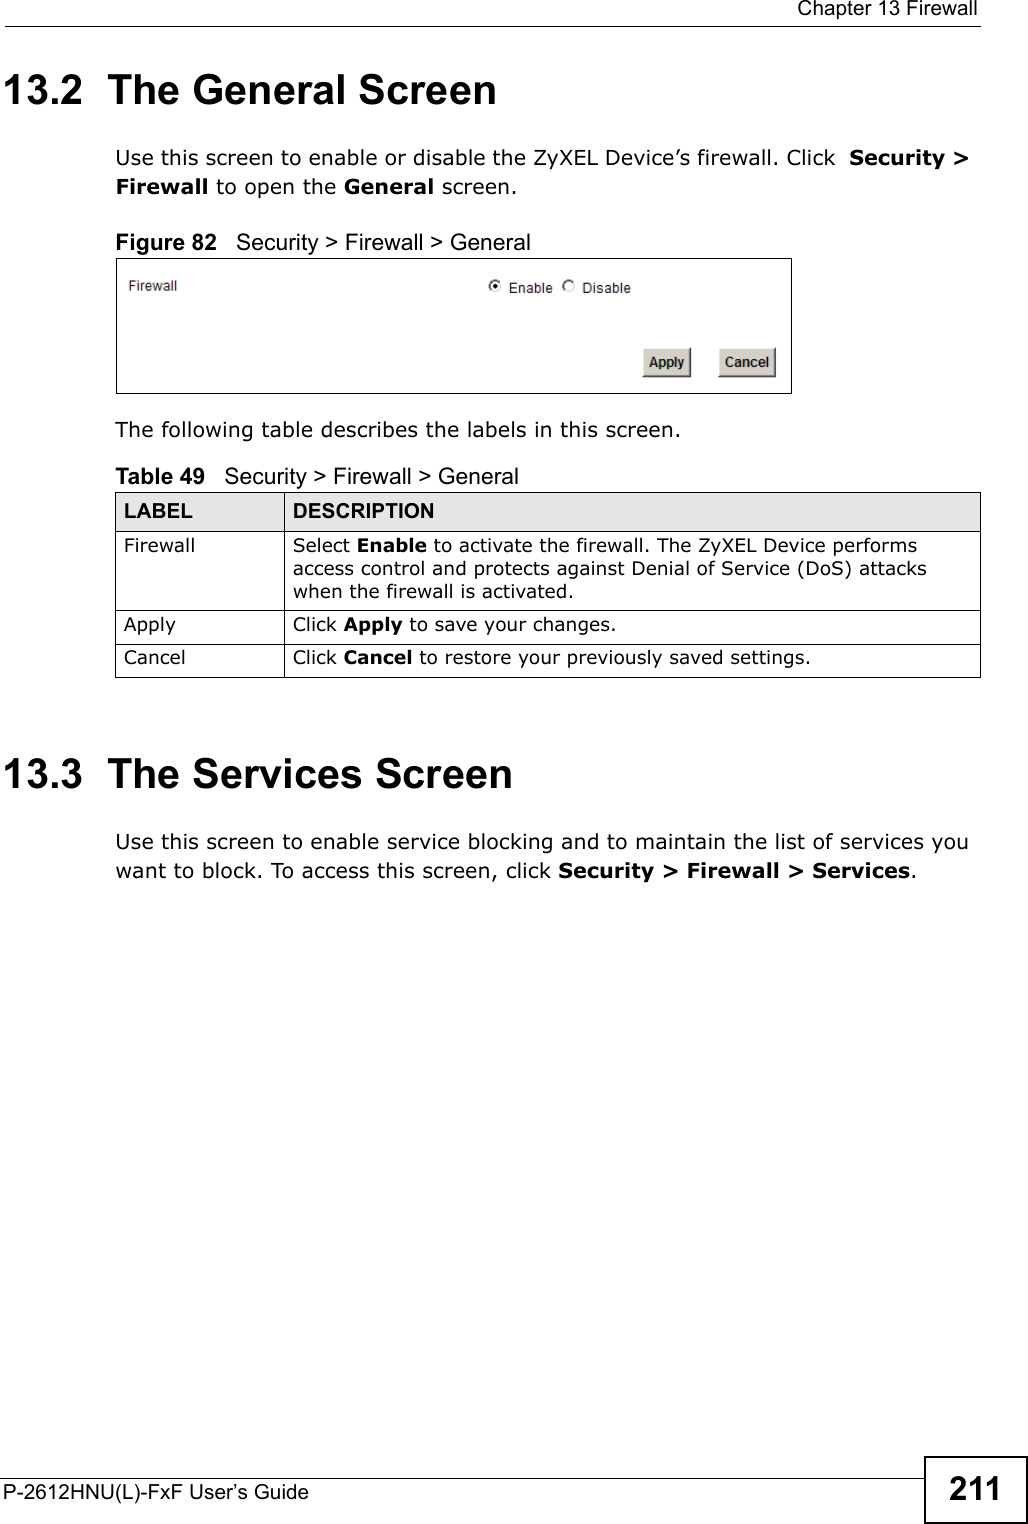  Chapter 13 FirewallP-2612HNU(L)-FxF User’s Guide 21113.2  The General Screen  Use this screen to enable or disable the ZyXEL Device’s firewall. Click Security &gt;Firewall to open the General screen.Figure 82   Security &gt; Firewall &gt; GeneralThe following table describes the labels in this screen.13.3  The Services ScreenUse this screen to enable service blocking and to maintain the list of services you want to block. To access this screen, click Security &gt; Firewall &gt; Services.Table 49   Security &gt; Firewall &gt; General LABEL DESCRIPTIONFirewall Select Enable to activate the firewall. The ZyXEL Device performs access control and protects against Denial of Service (DoS) attacks when the firewall is activated.Apply Click Apply to save your changes.Cancel Click Cancel to restore your previously saved settings.